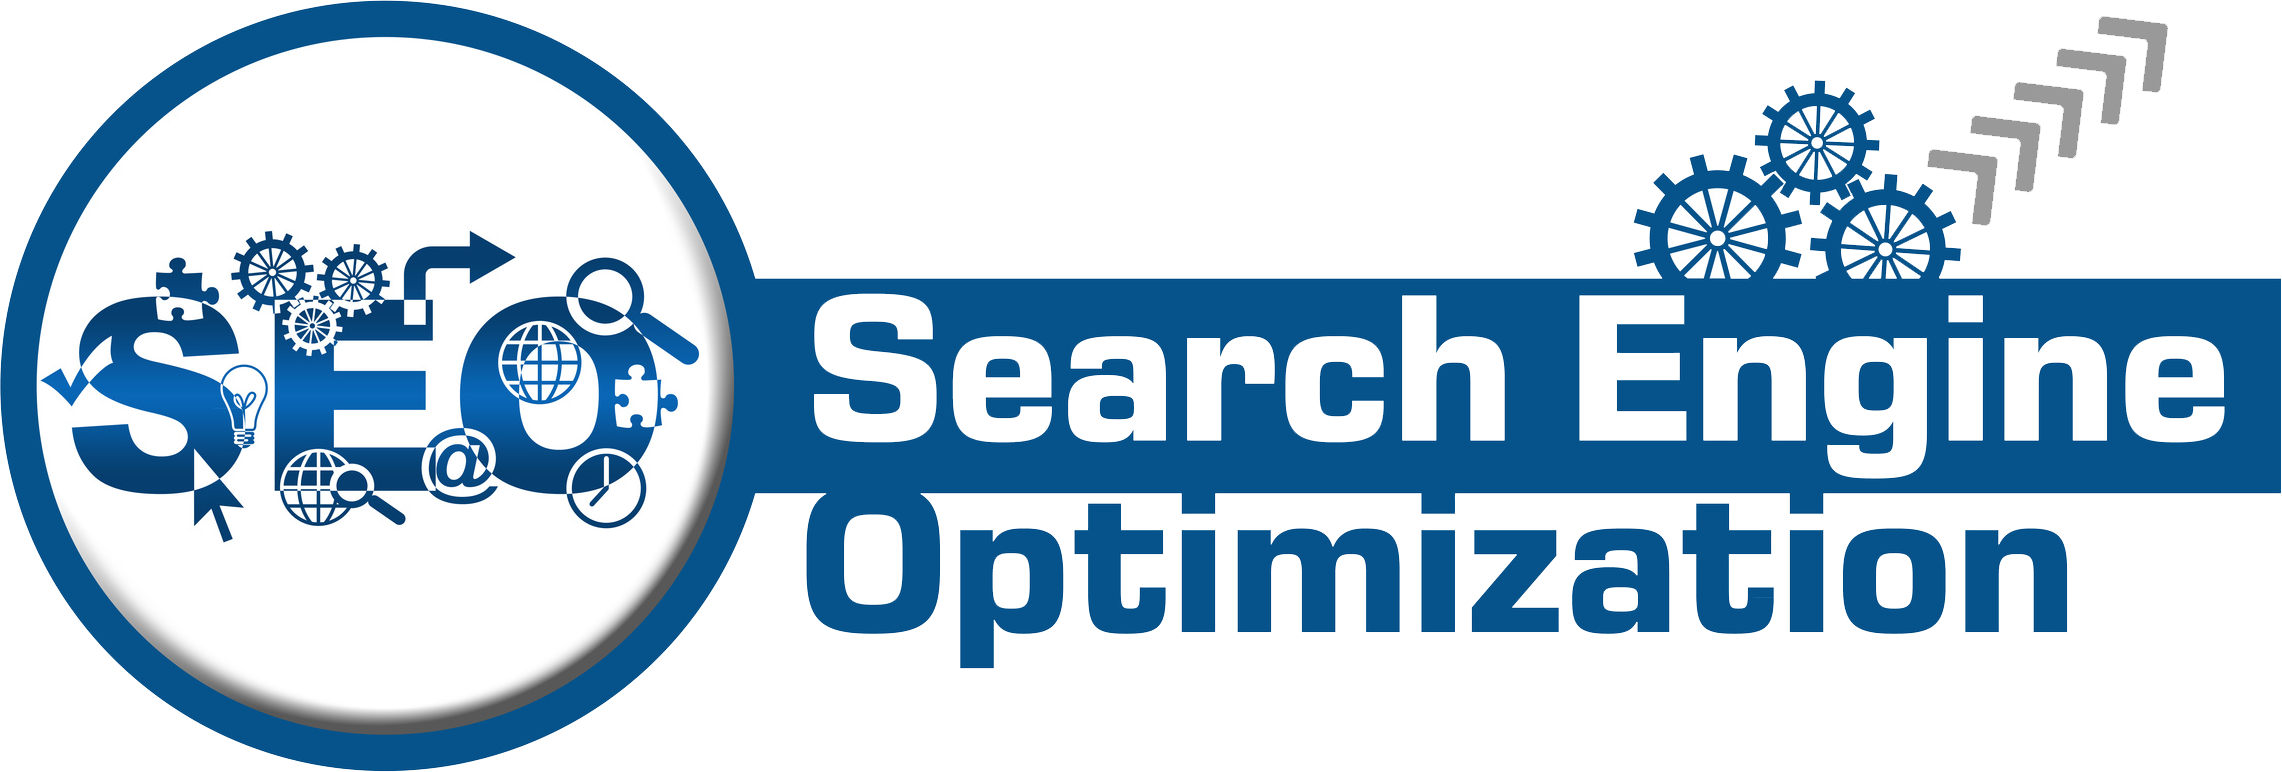 How SEO Optimized Website Helps Your Business Grow Online